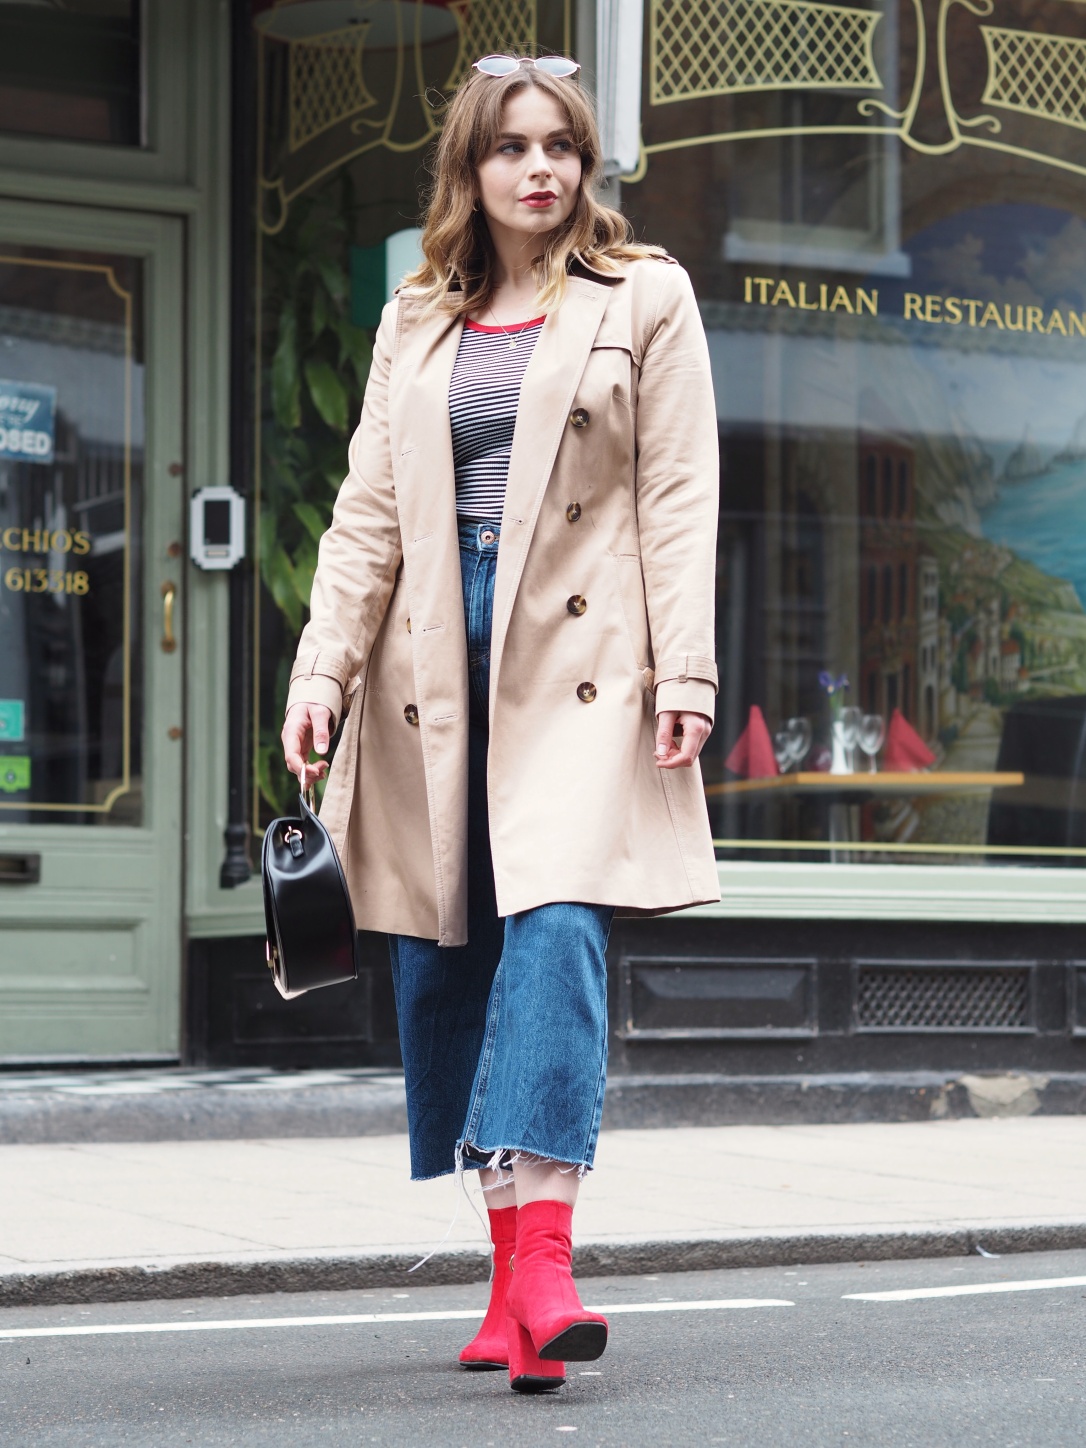 Styling a trench coat for spring